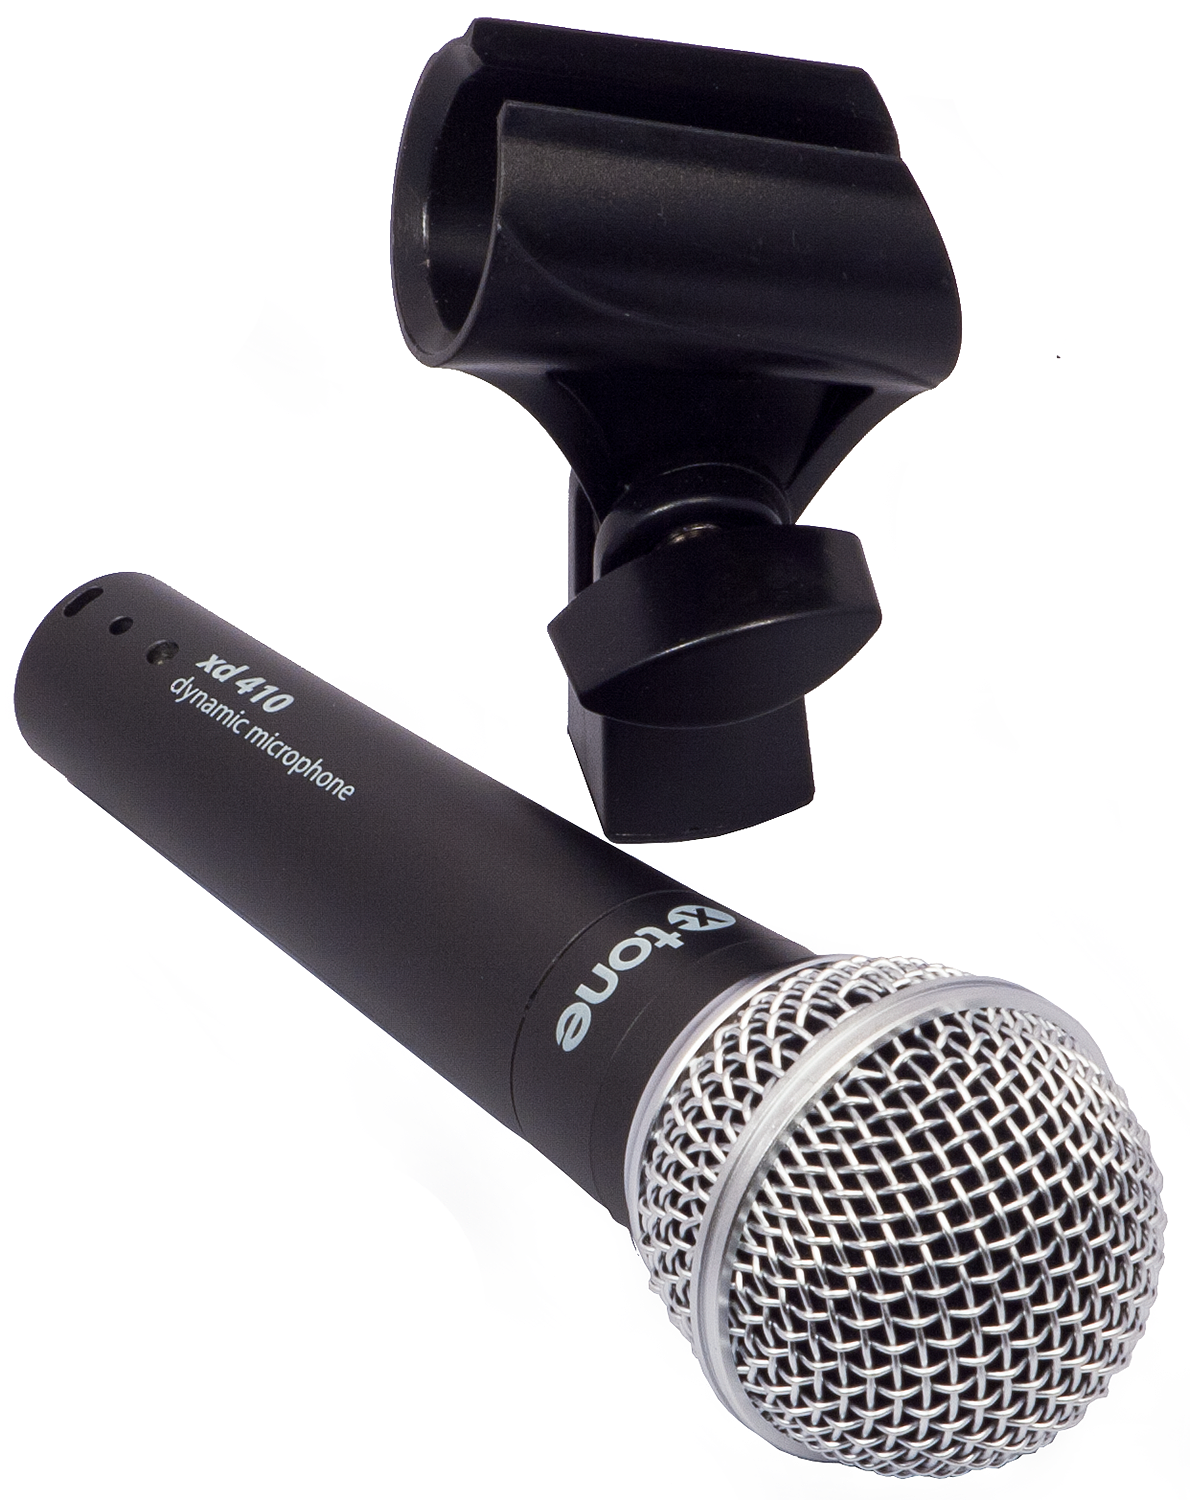 X-tone Xd-410 - Vocal microphones - Main picture